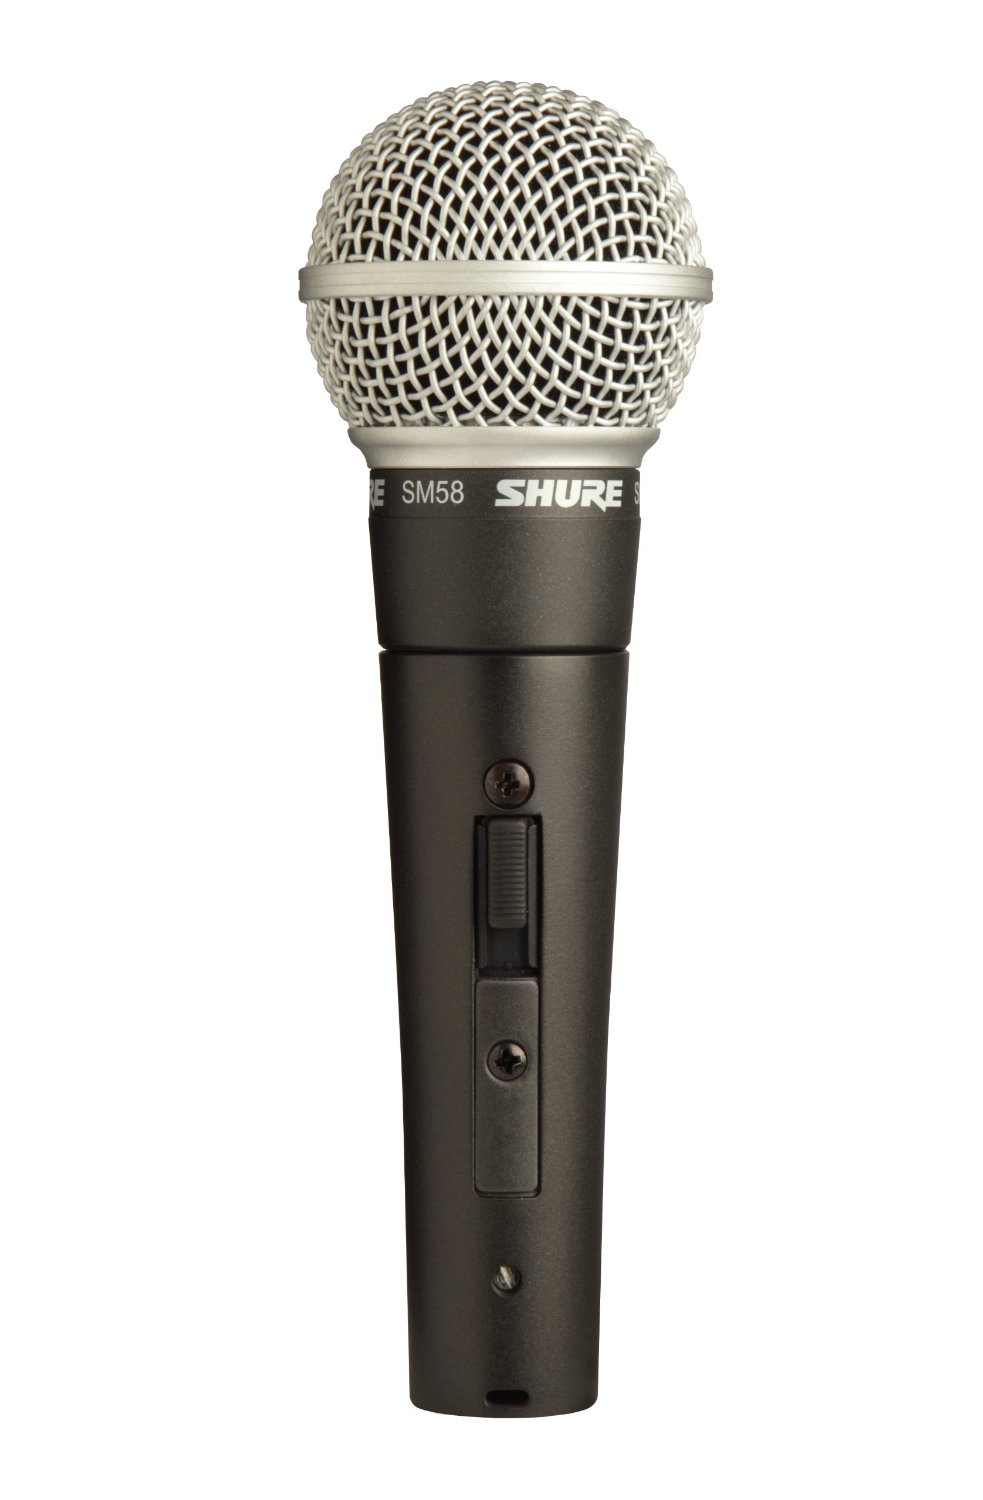 Best Dynamic Budget Microphones